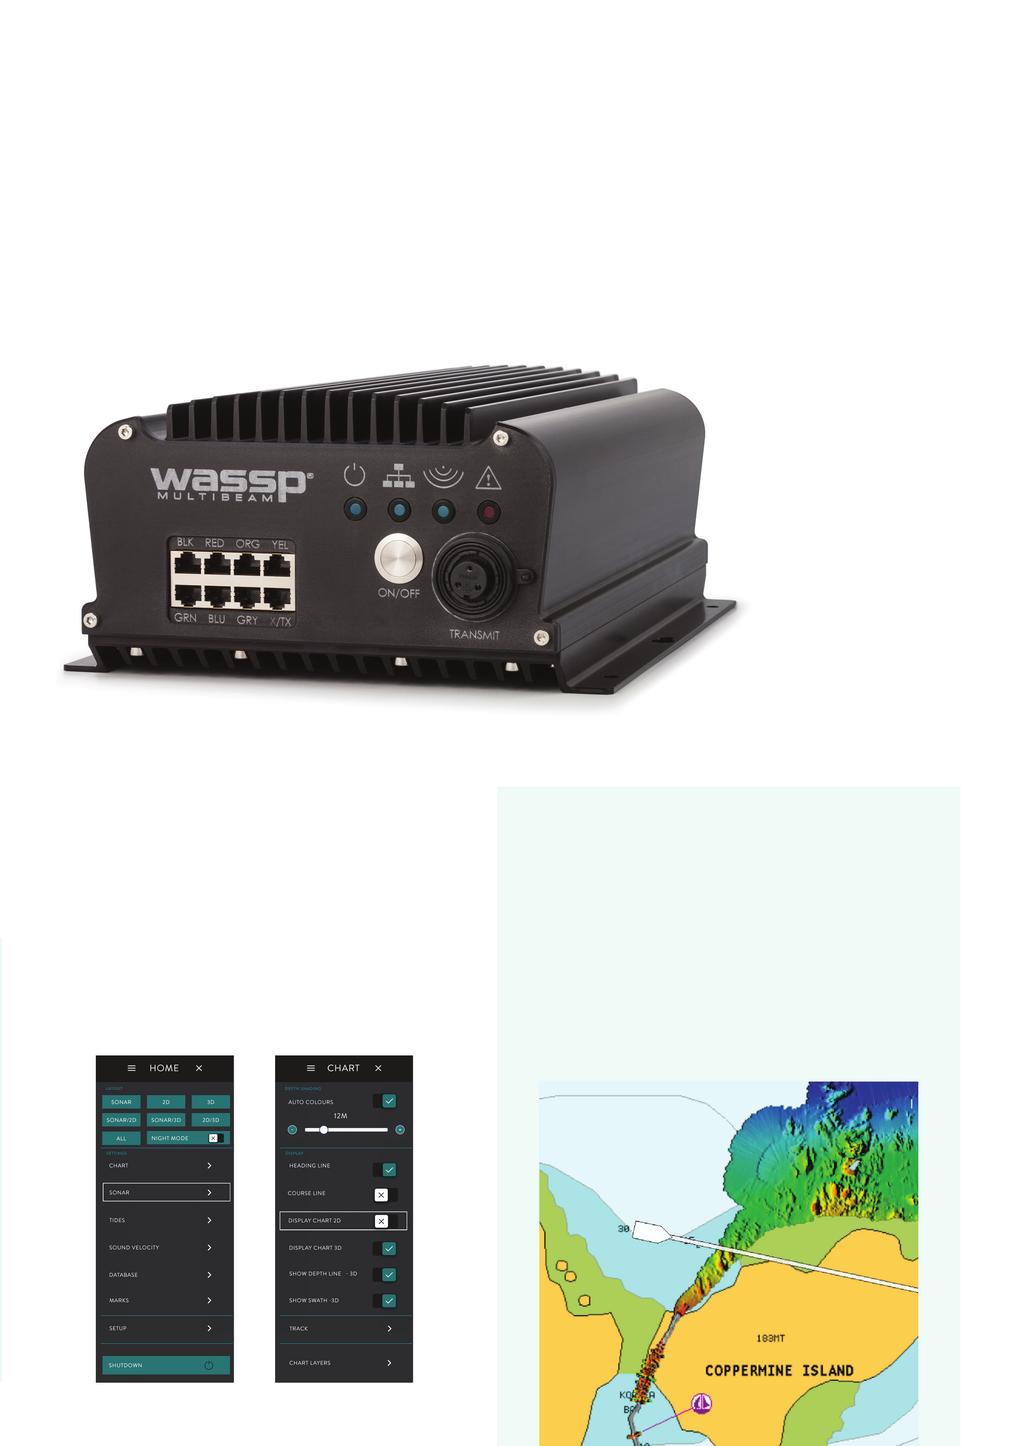 WASSP S3 DRX MULTIBEAM HARDWARE FOR THE FUTURE This innovative low power, all-in-one black-box is not just a robust hardware platform but also introduces cutting-edge technical innovations and